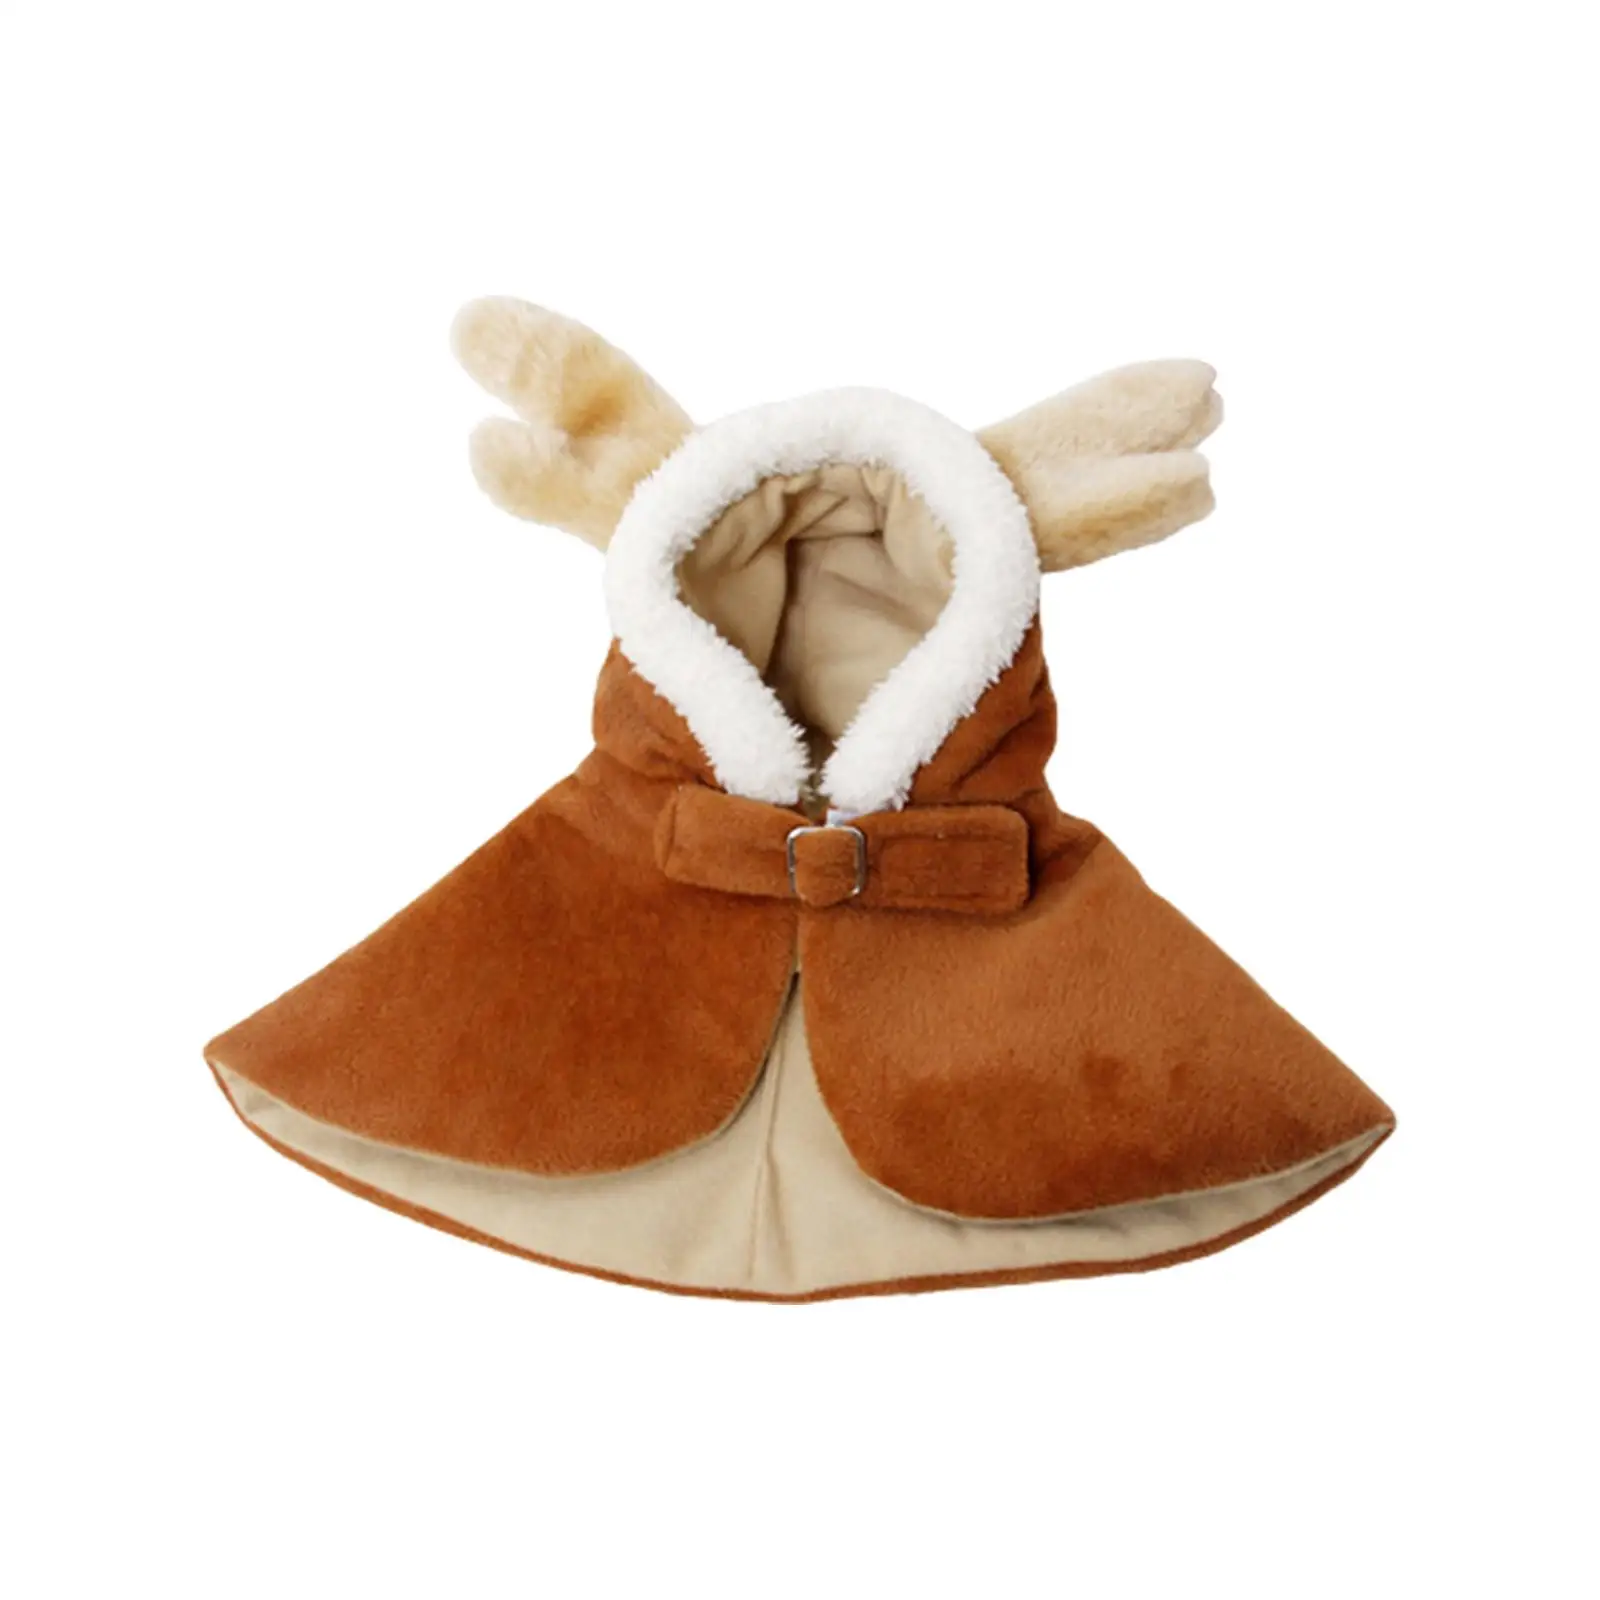 Pet Cat Cosplay Deer Costume Cloak Clothes Plush Warm Pet Reindeer Dress Outfits Hat Apparel for Dress Holiday Party Decoration